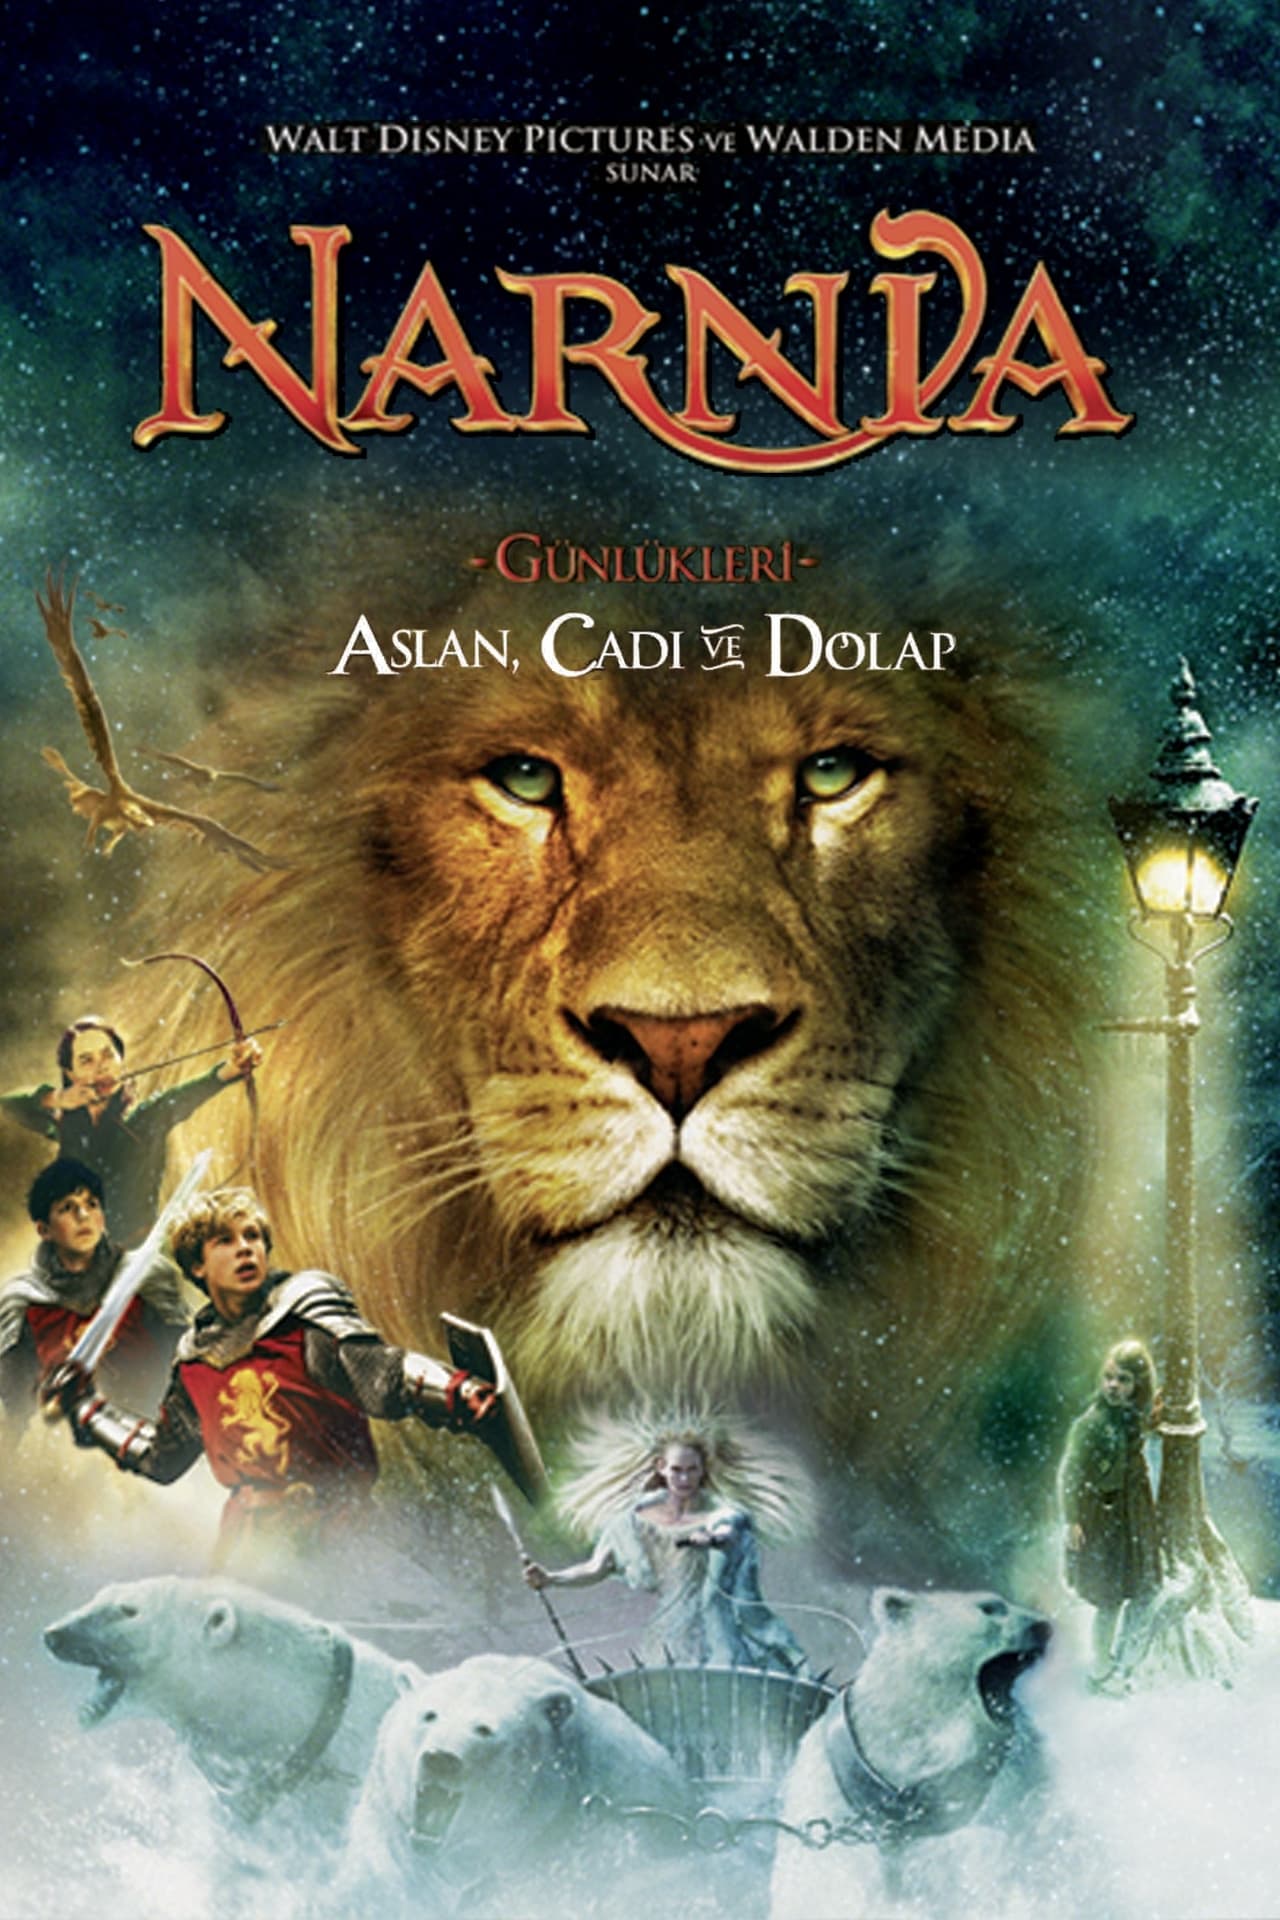 The Chronicles of Narnia: The Lion, the Witch and the Wardrobe (2005) 256Kbps 23.976Fps 48Khz 5.1Ch Disney+ DD+ E-AC3 Turkish Audio TAC